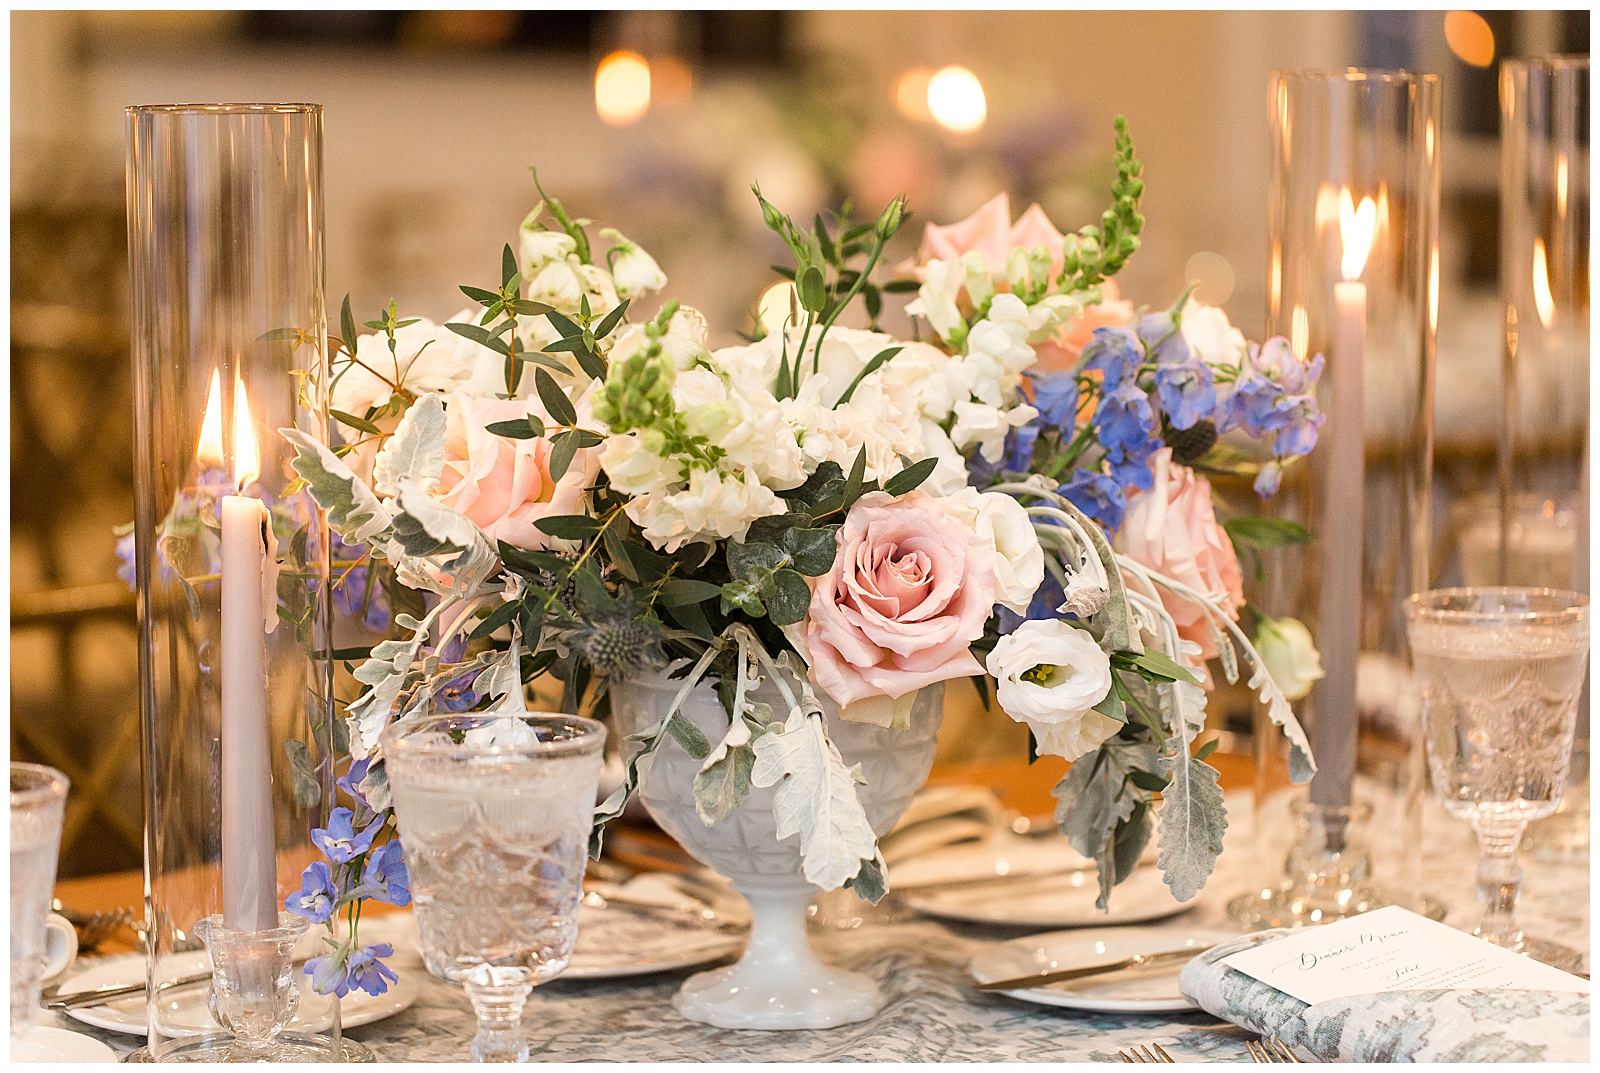 Table arrangements by Beach Plum Florals and Jessica Hennessey Weddings